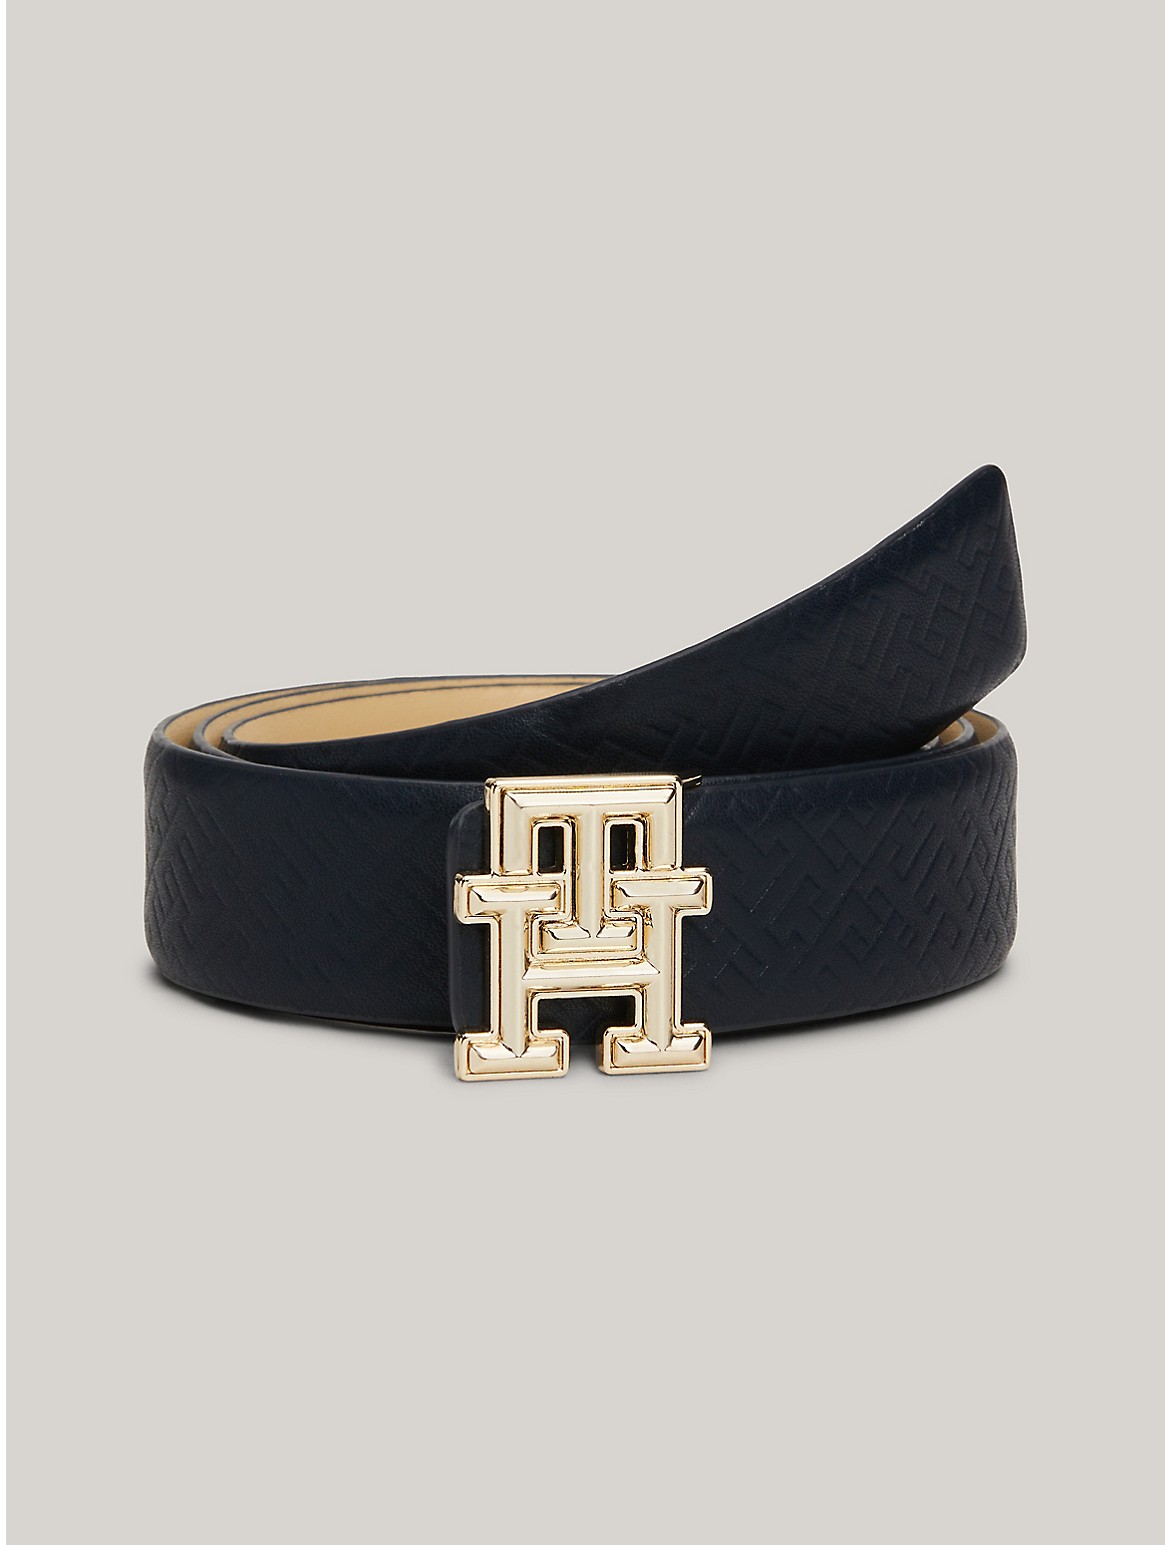 Tommy Hilfiger Th Logo Reversible Leather Belt In Space Blue Monogram / Harvest Wheat